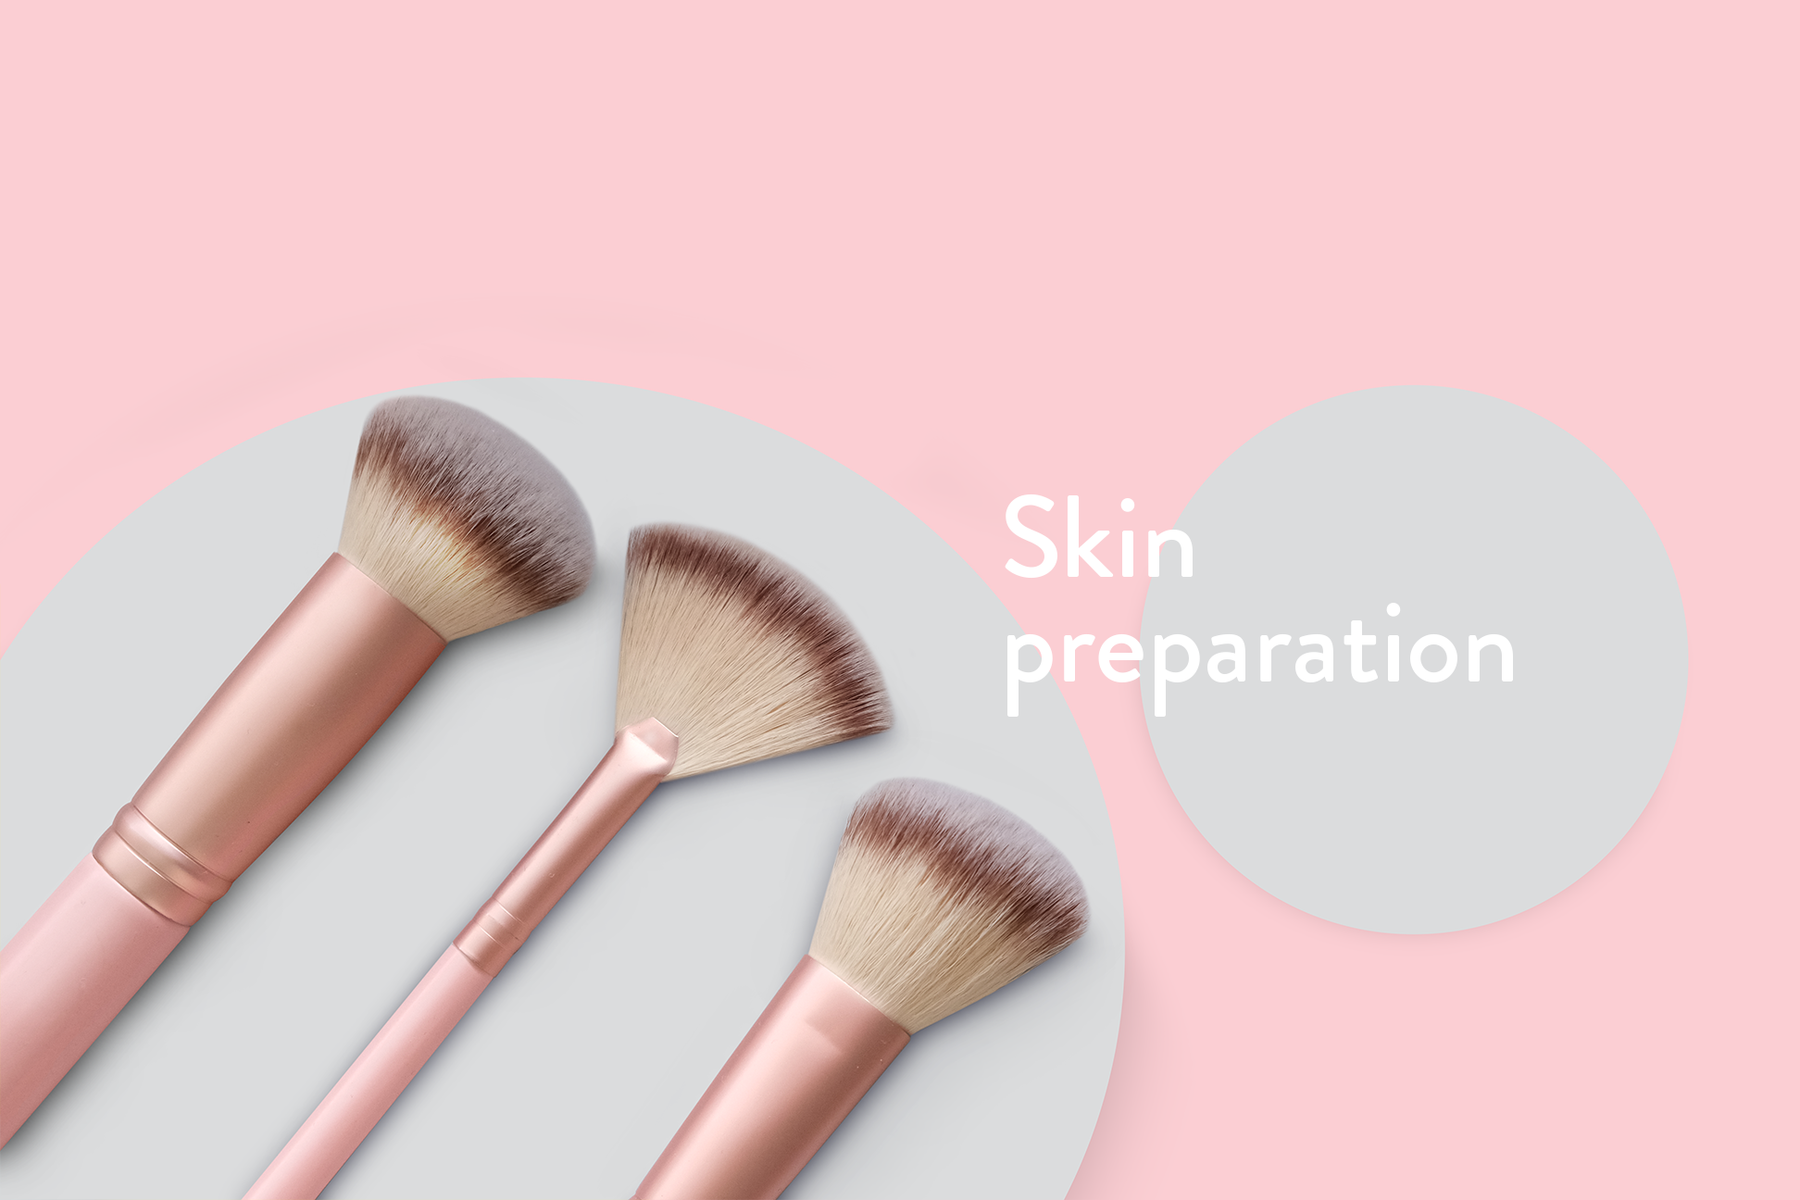 HOW TO PREPARE YOUR SKIN FOR MAKE-UP?